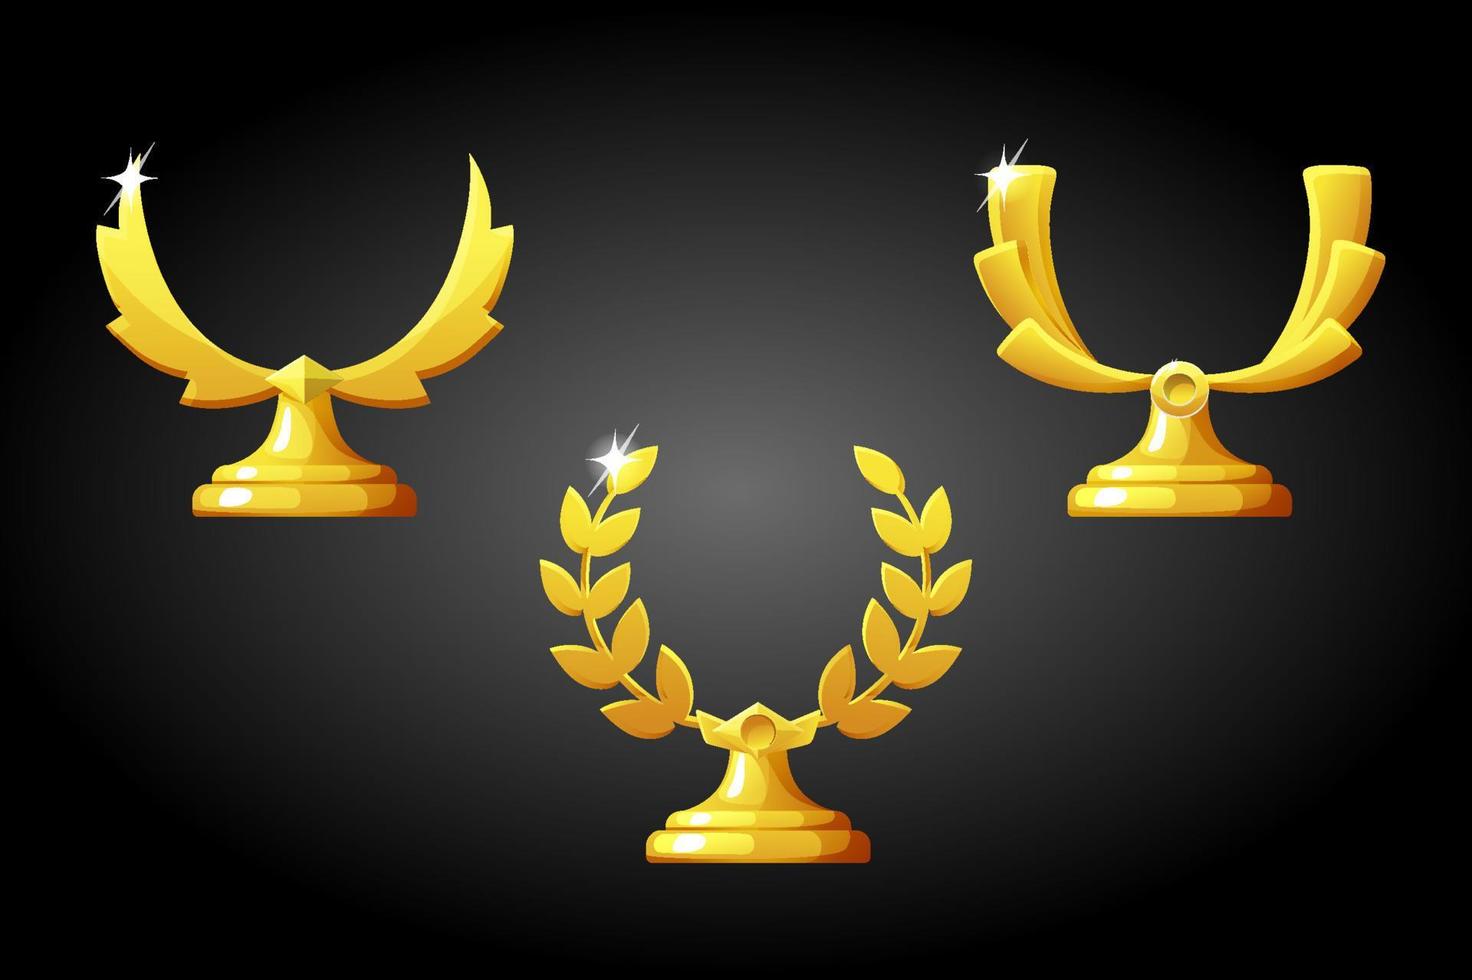 Gold reward achievement templates for the game. Set of vector blank awards for the winner.